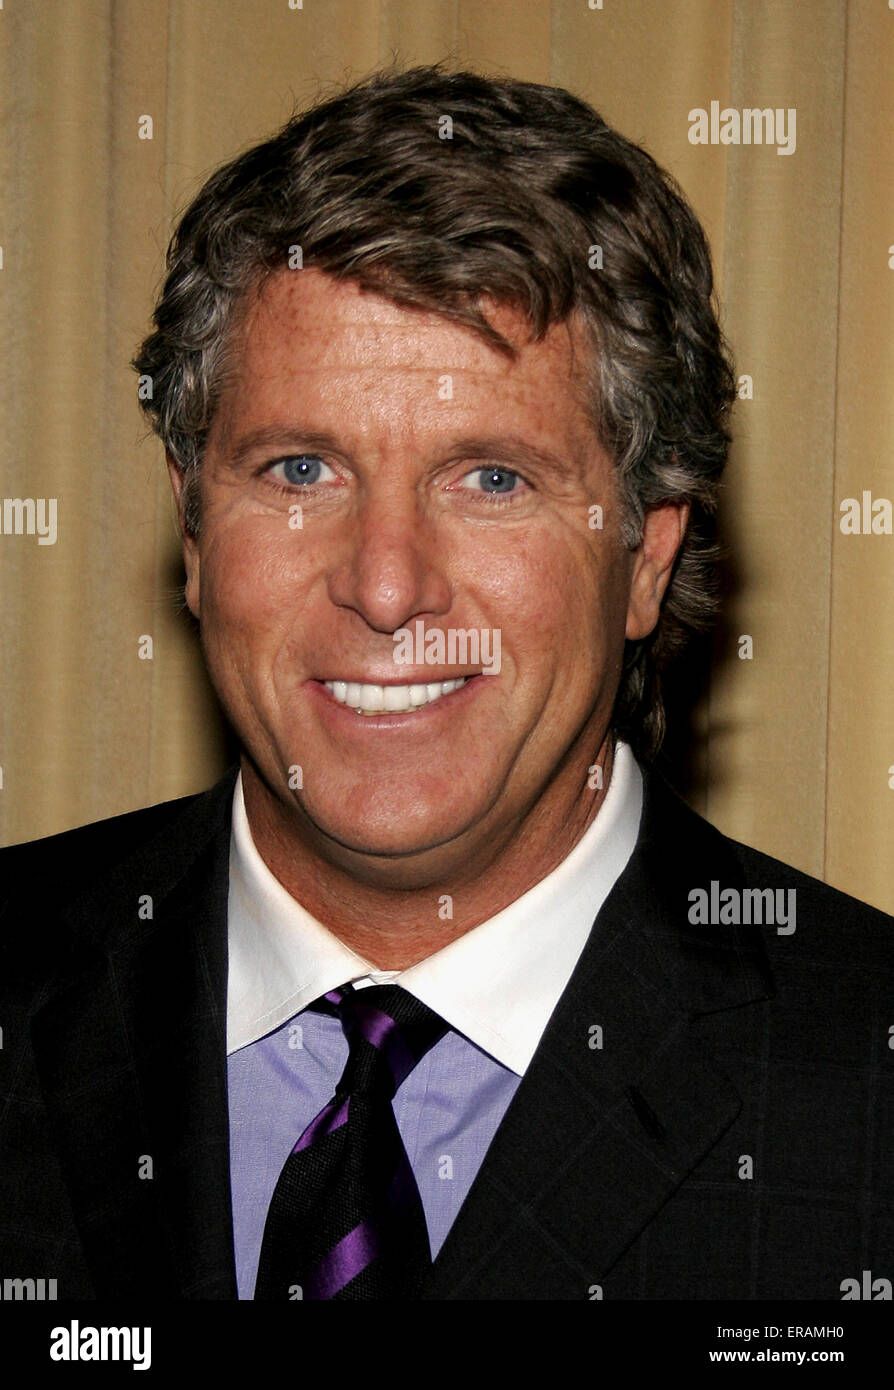 Donny Deutsch at the 10th Annual PRISM Awards held at the Beverly Hills Hotel in Beverly Hills on April 27, 2006. Stock Photo